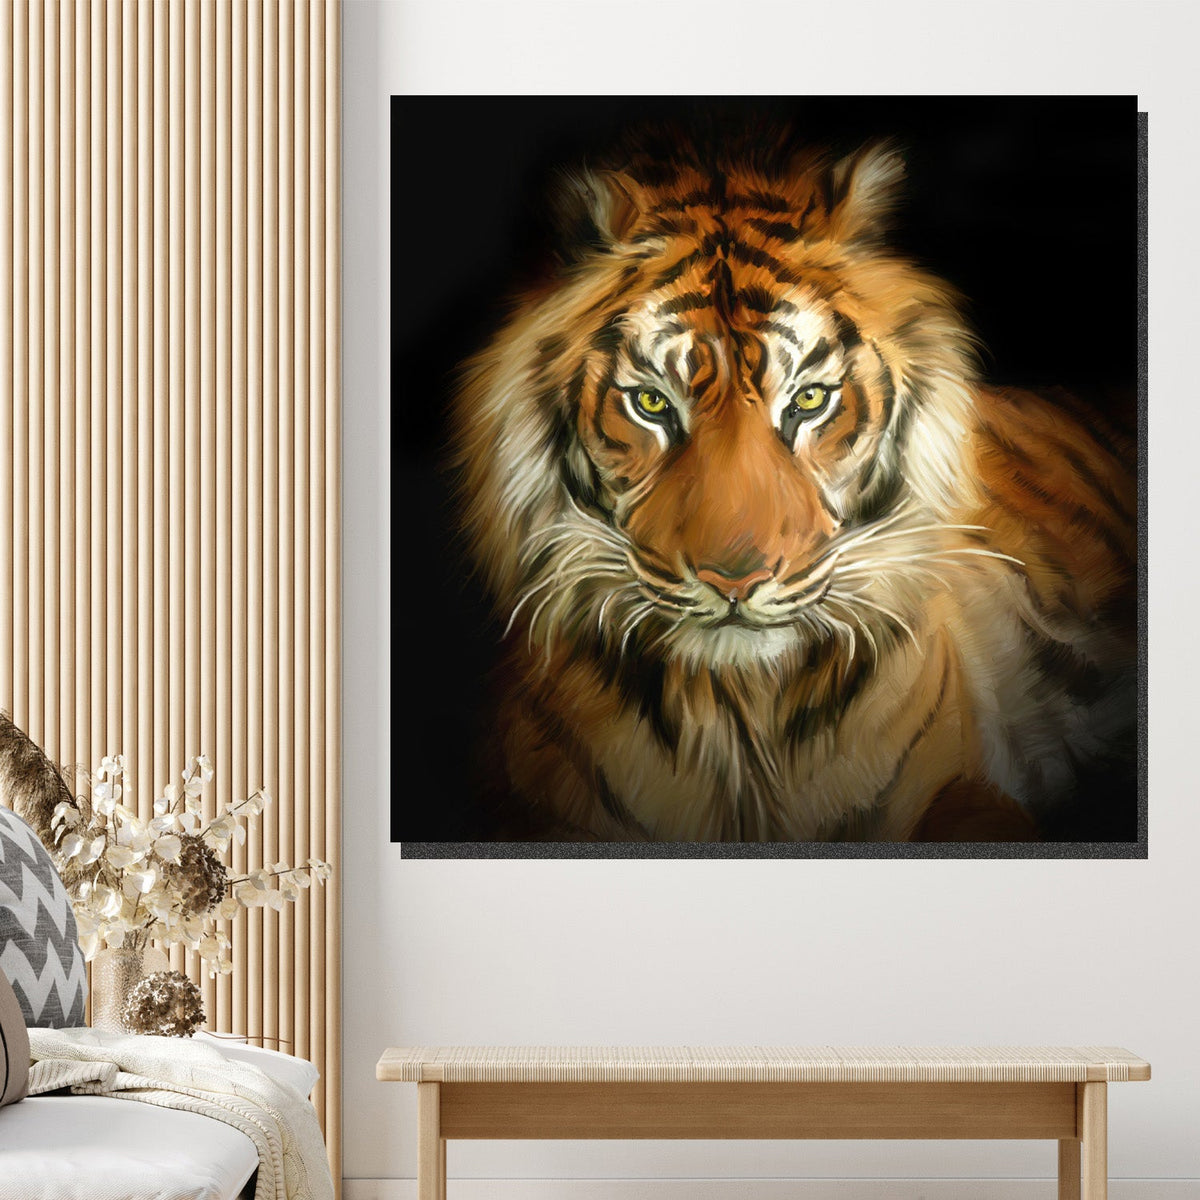 https://cdn.shopify.com/s/files/1/0387/9986/8044/products/PaintedTigerCanvasArtprintStretched-3.jpg